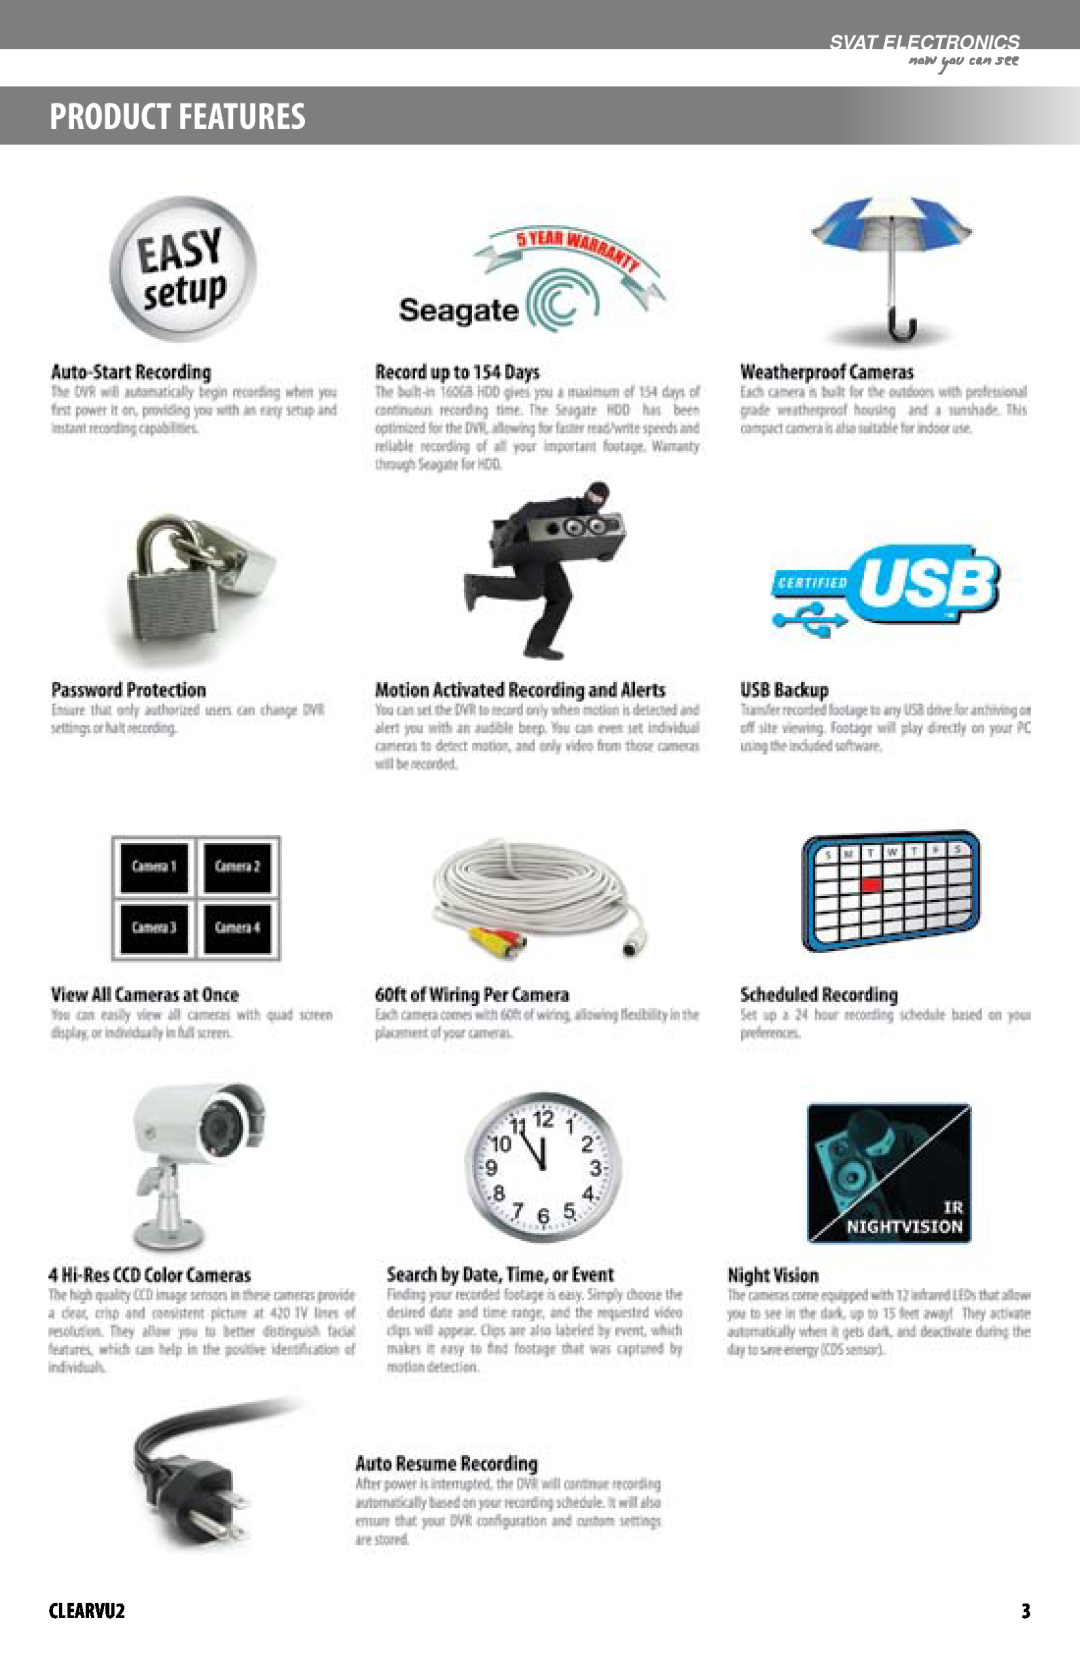 SVAT Electronics CLEARVU2 instruction manual Product Features, now you can see, Svat Electronics 